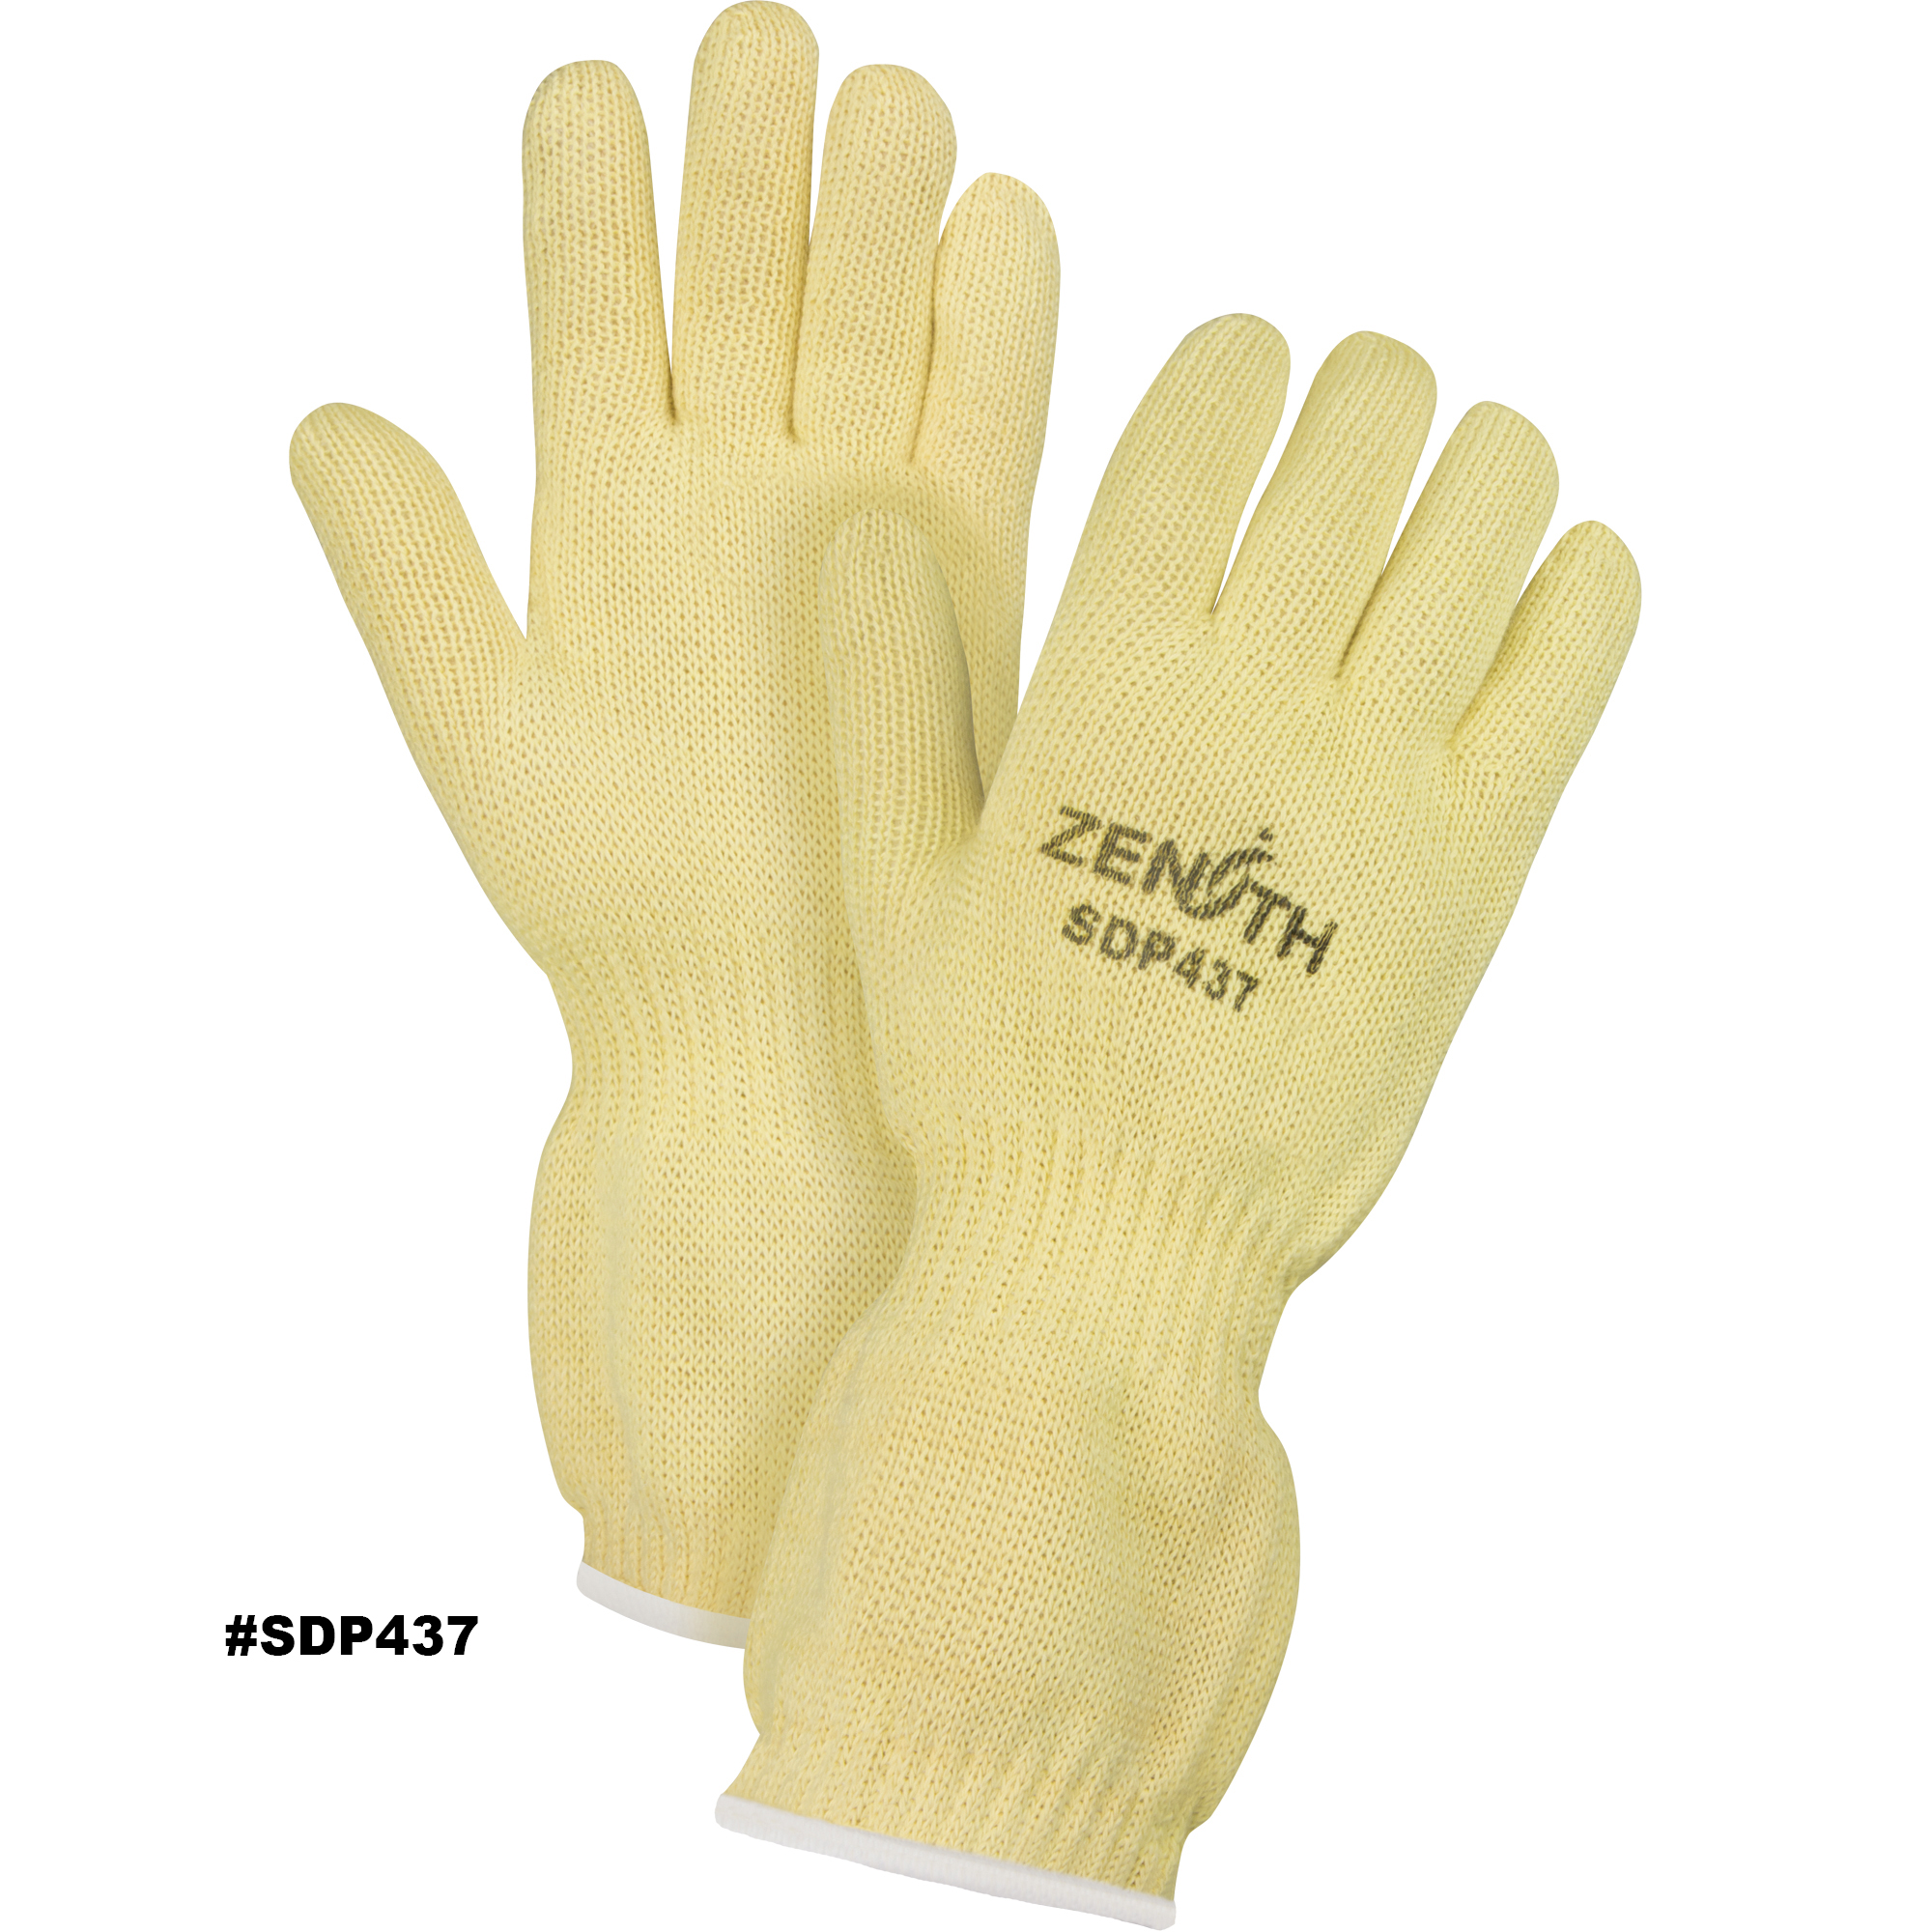 Zenith Heat-Resistant Gloves, Twaron®, Large, Protects Up To 482° F (250° C) Model: SDP437